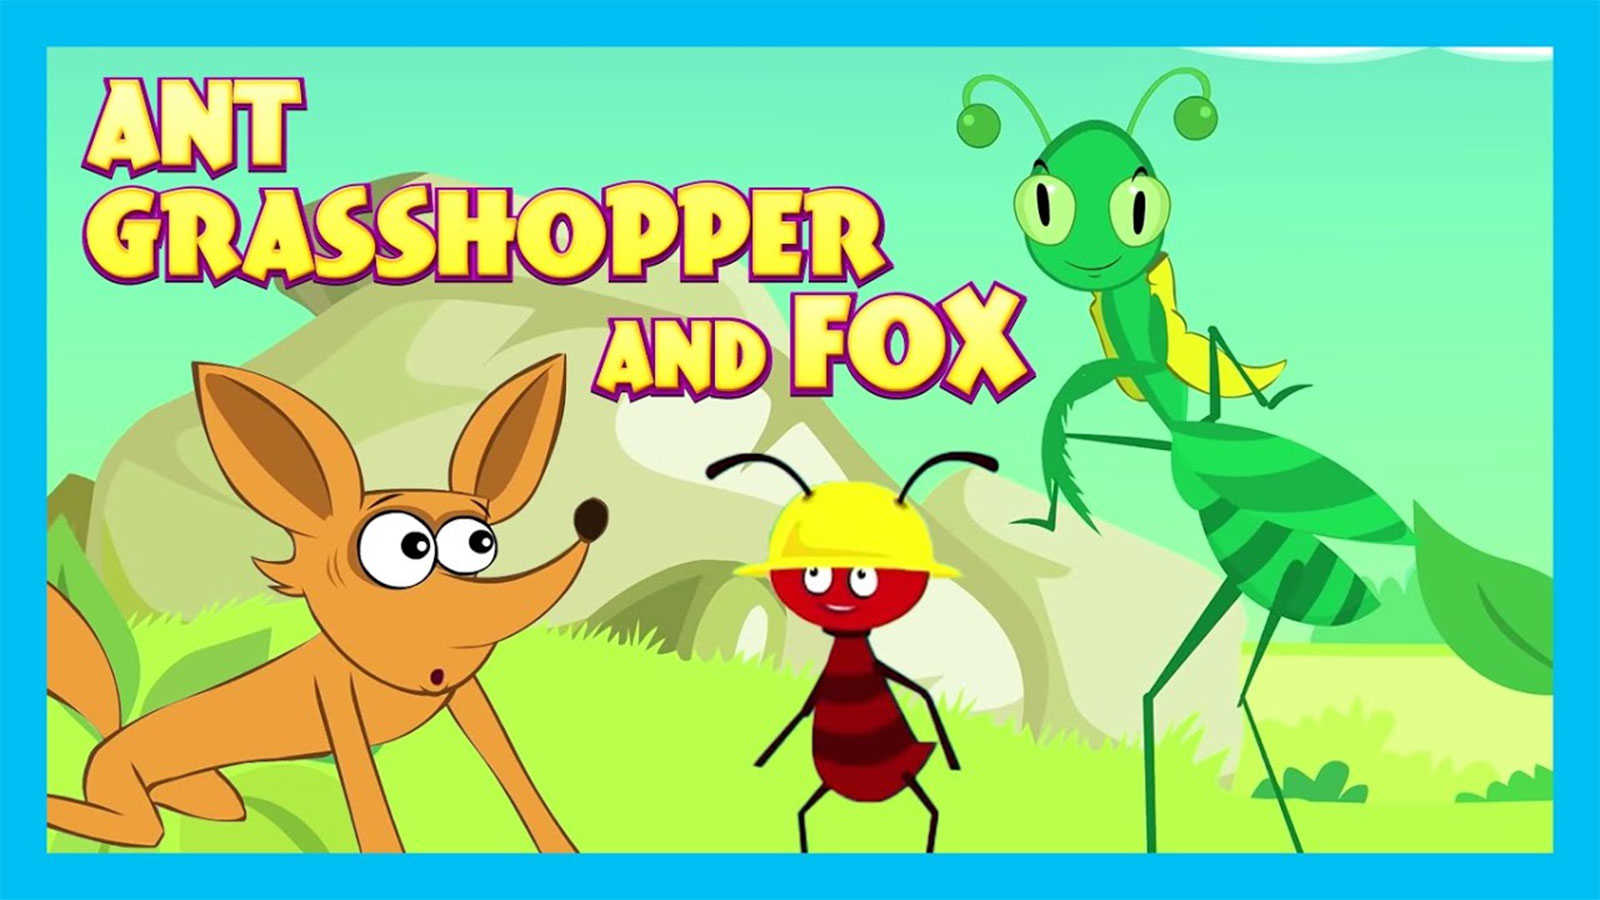 Popular Kids Songs and English Nursery Story 'The Ant And The Grasshopper'  for Kids - Check out Children's Nursery Rhymes, Baby Songs, Fairy Tales In  English | Entertainment - Times of India Videos